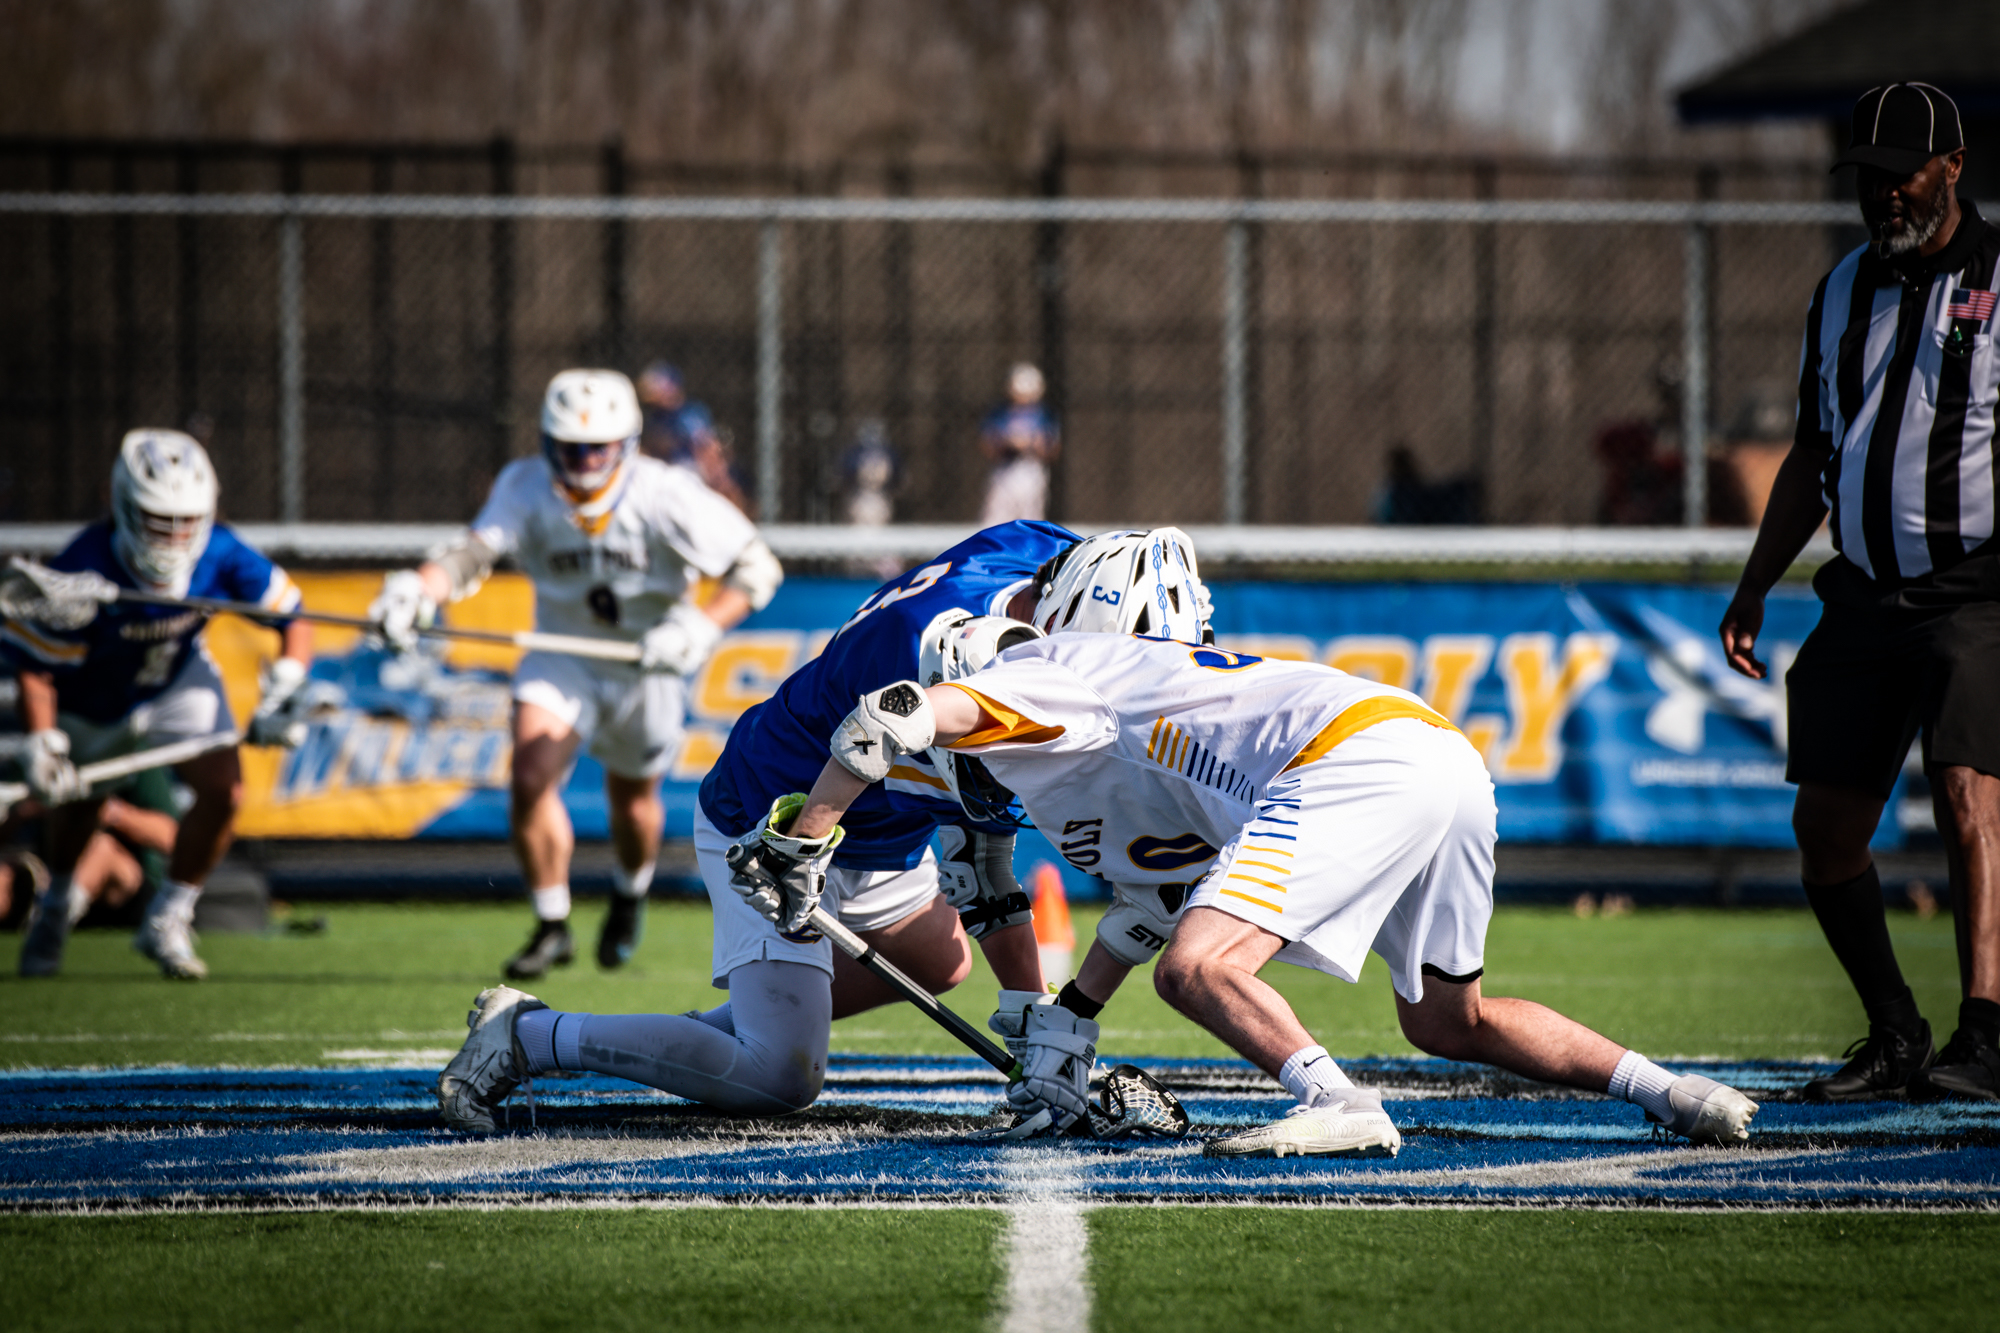 MLAX: Late Push by Maine Maritime Hands Poly First Loss in NAC Play.